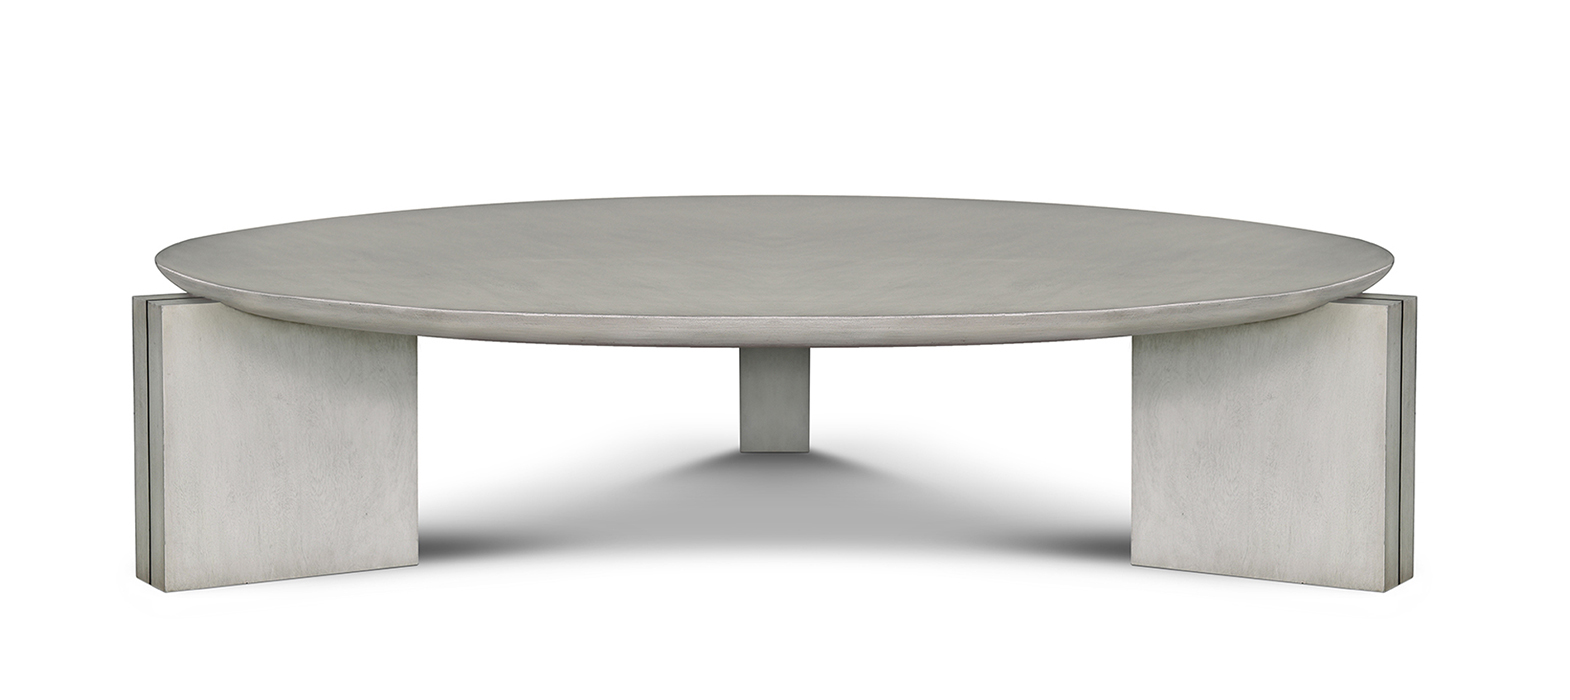 CHIANNI COCKTAIL TABLE